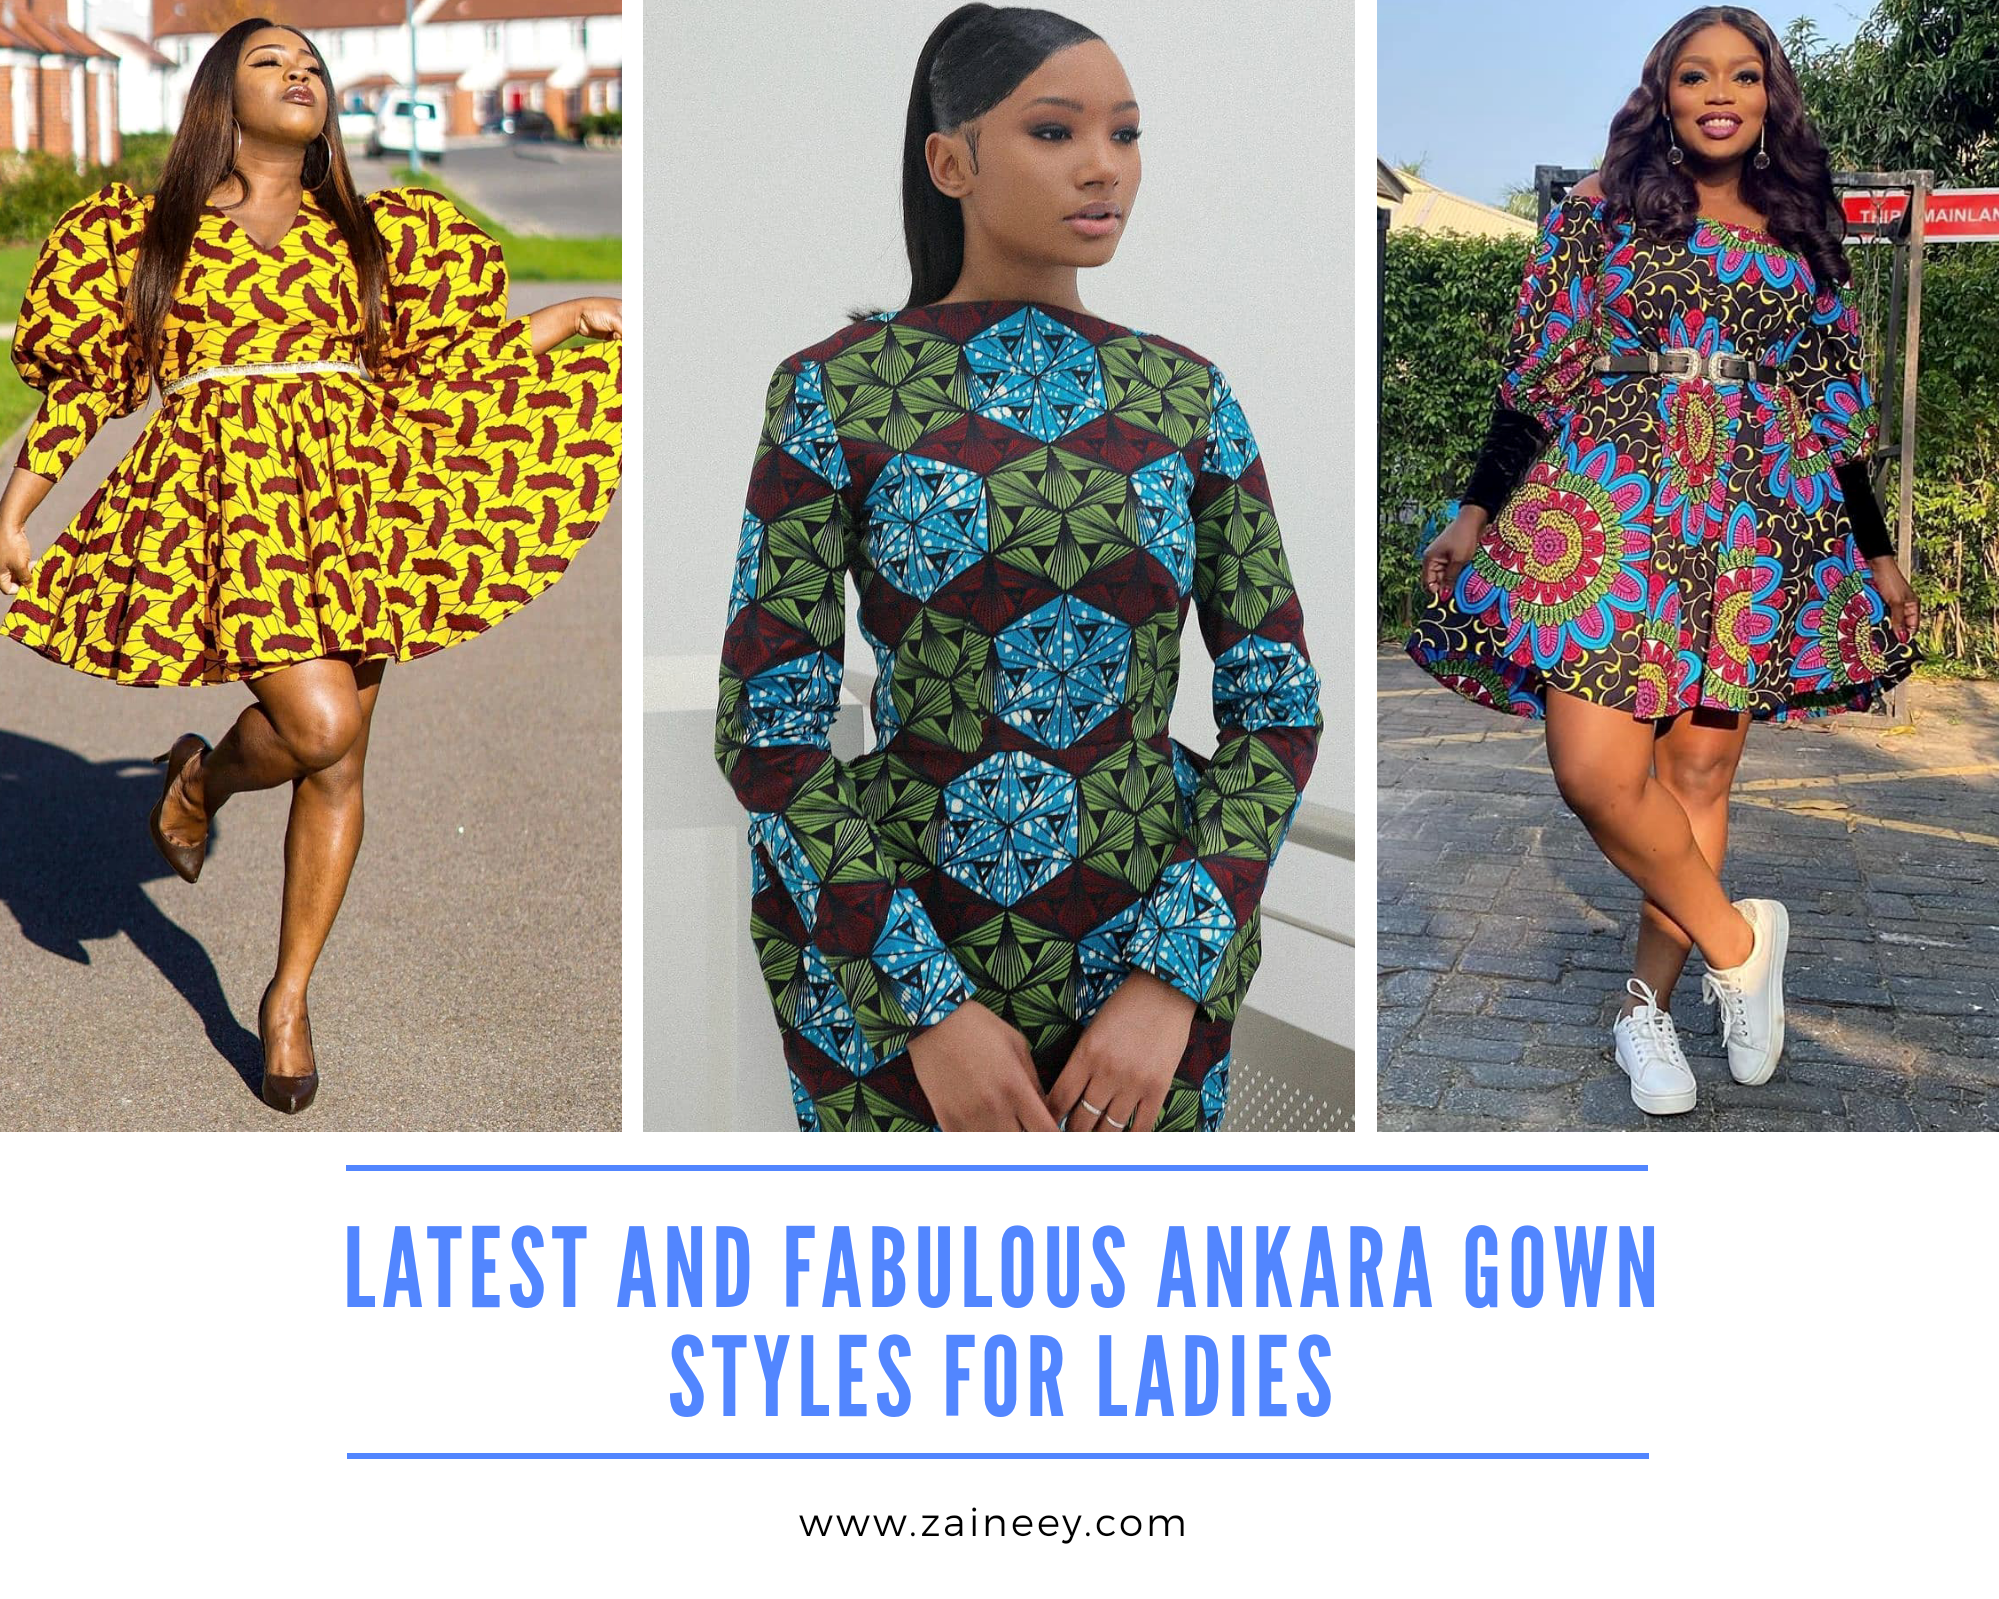 For Ladies: Latest Ankara Gown Styles 2022 - Reny styles